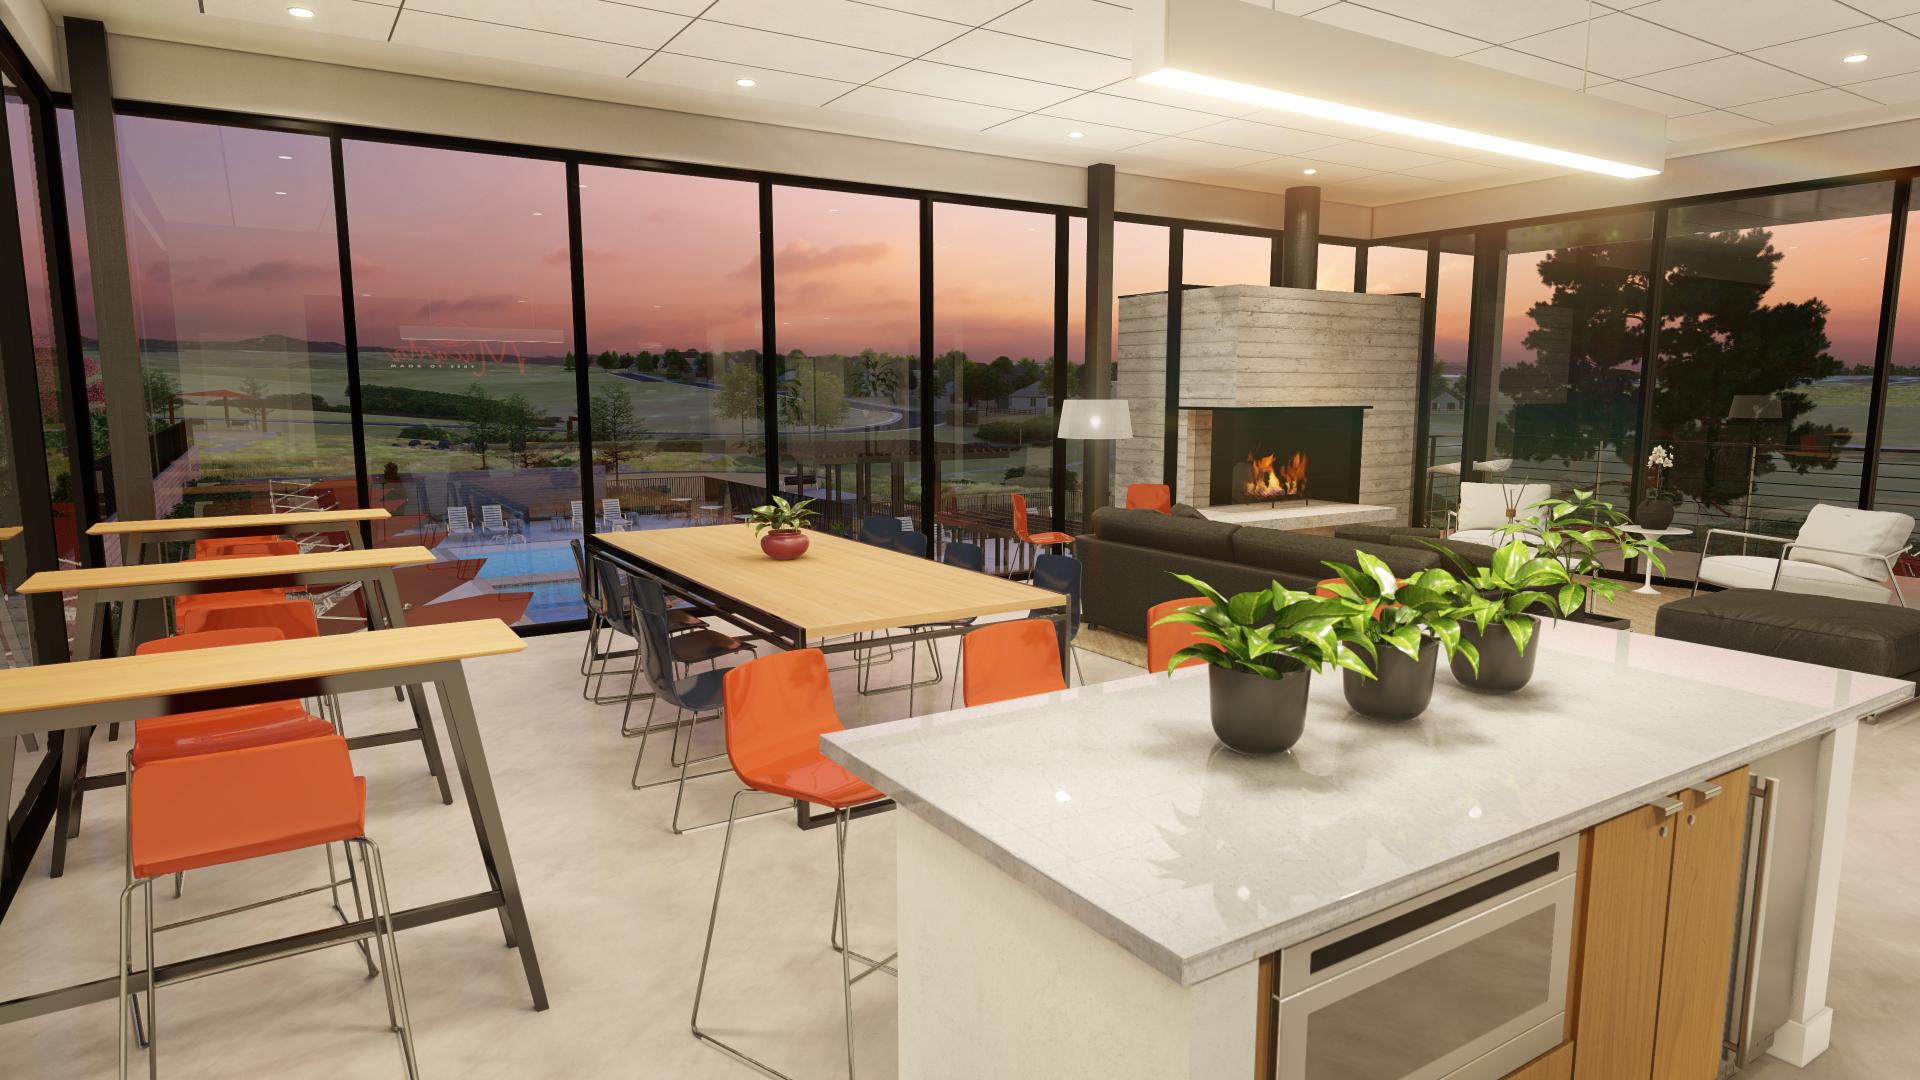 The Spoke Amenity Center lounge area with fireplace